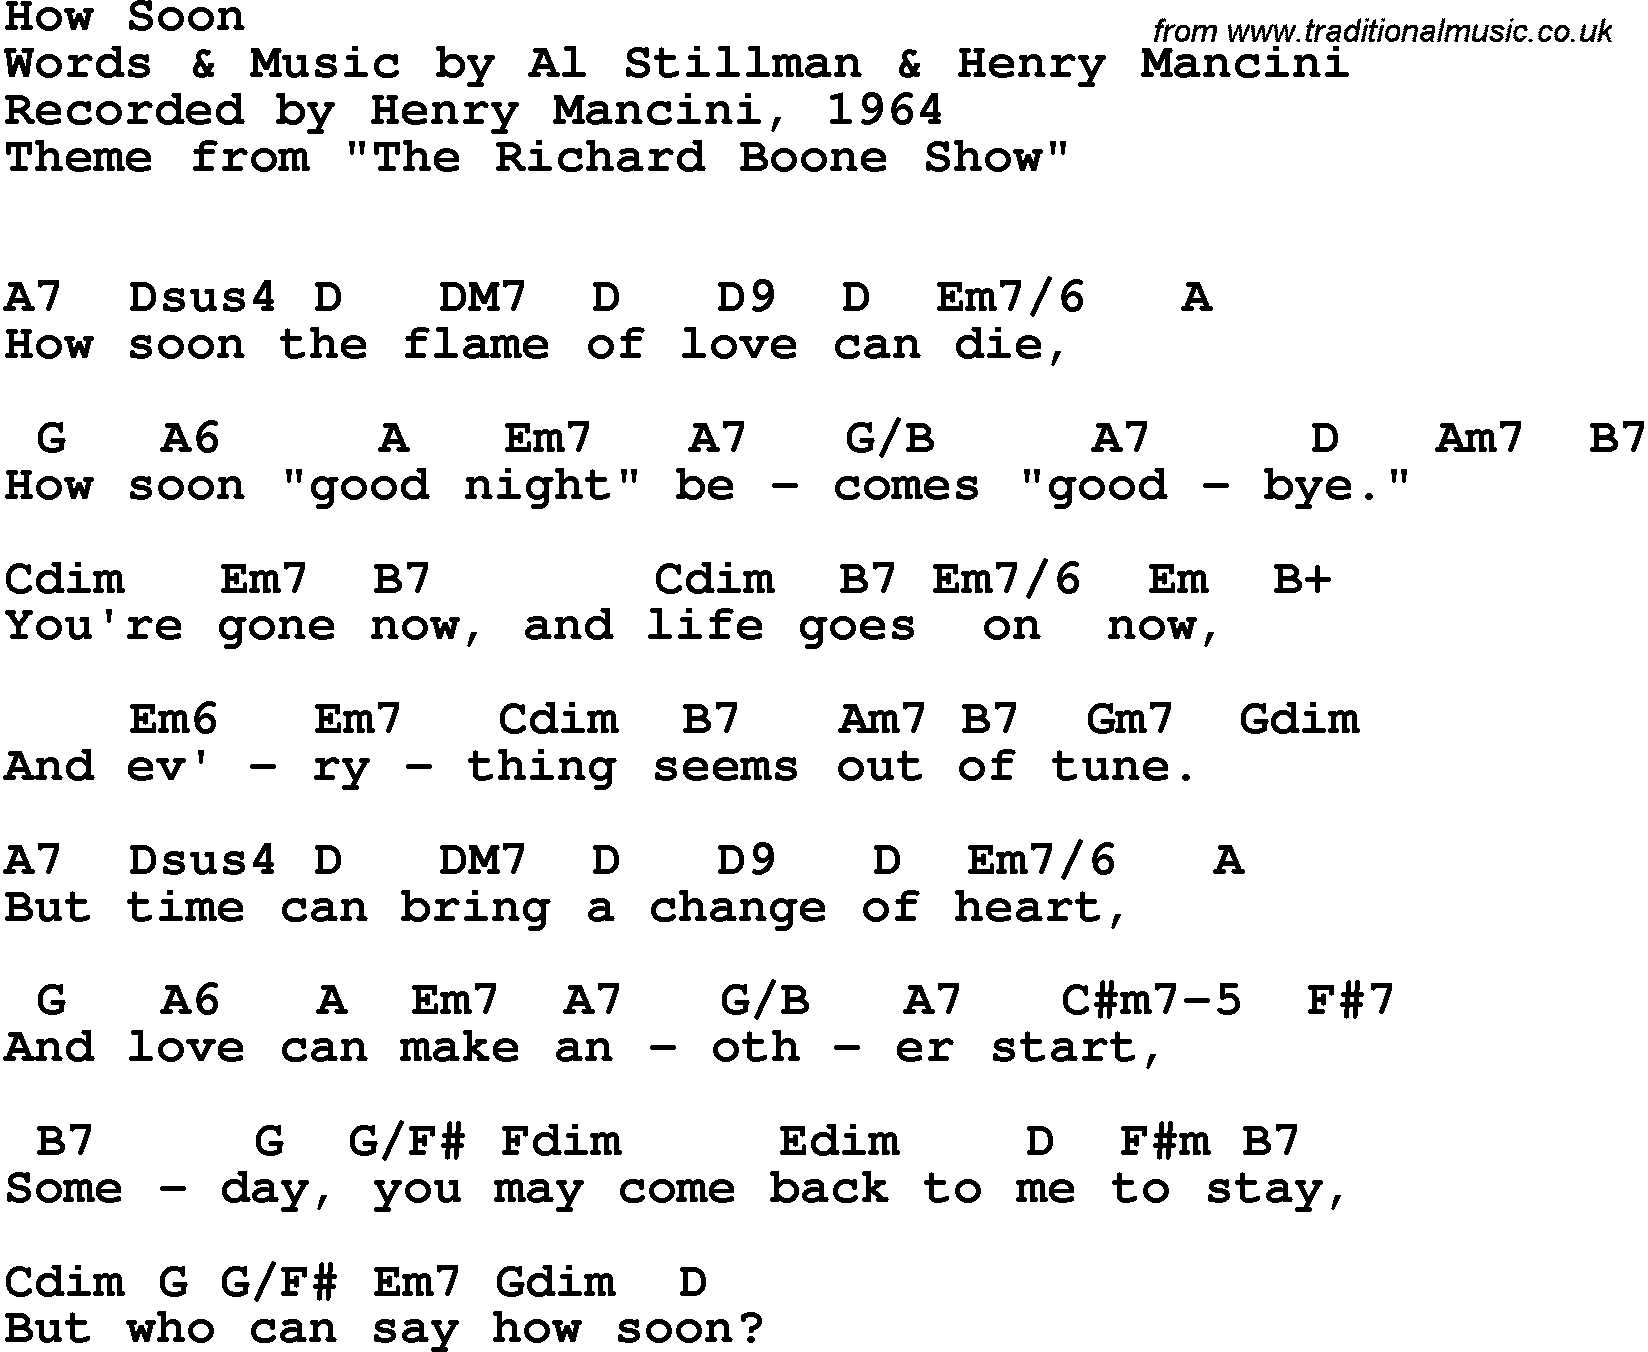 Song Lyrics with guitar chords for How Soon - Henry Mancini, 1964